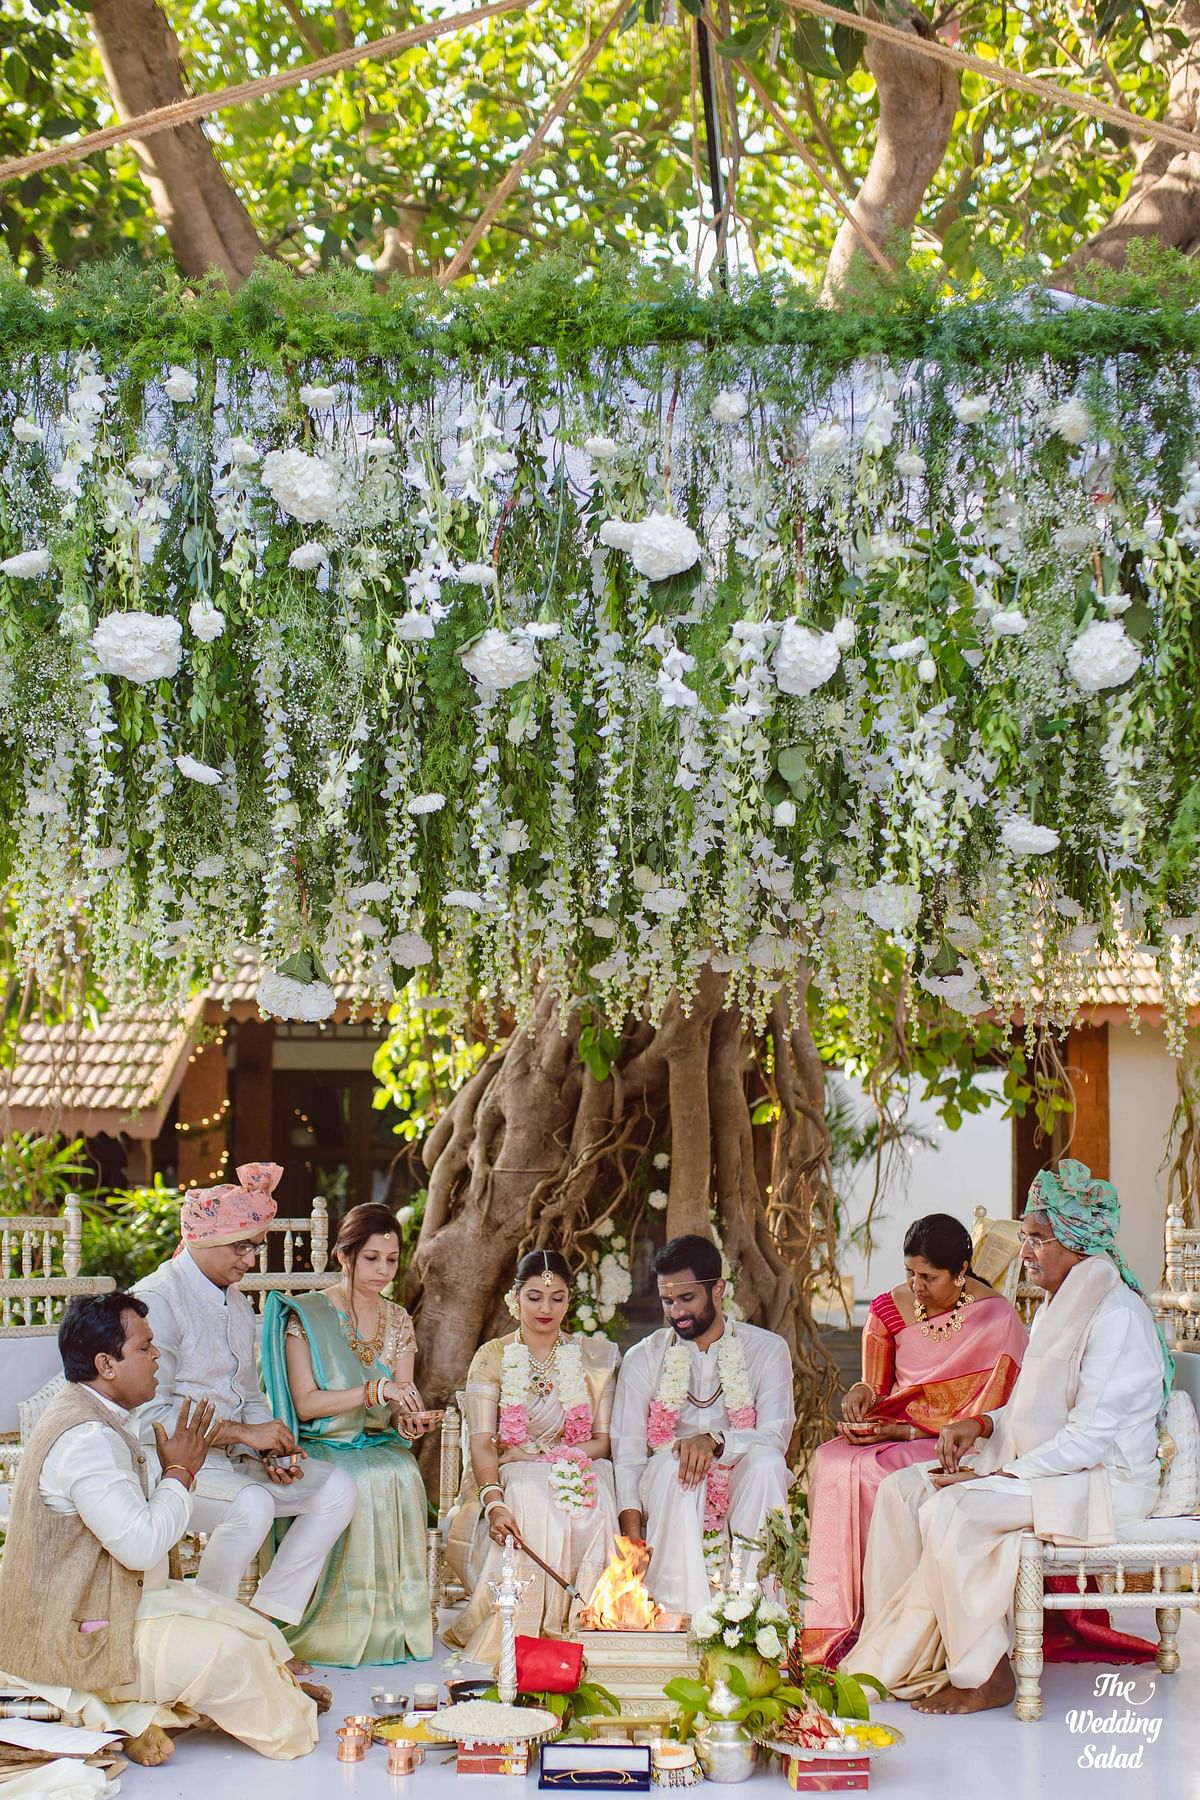 After plastic ban, weddings go with green alternatives